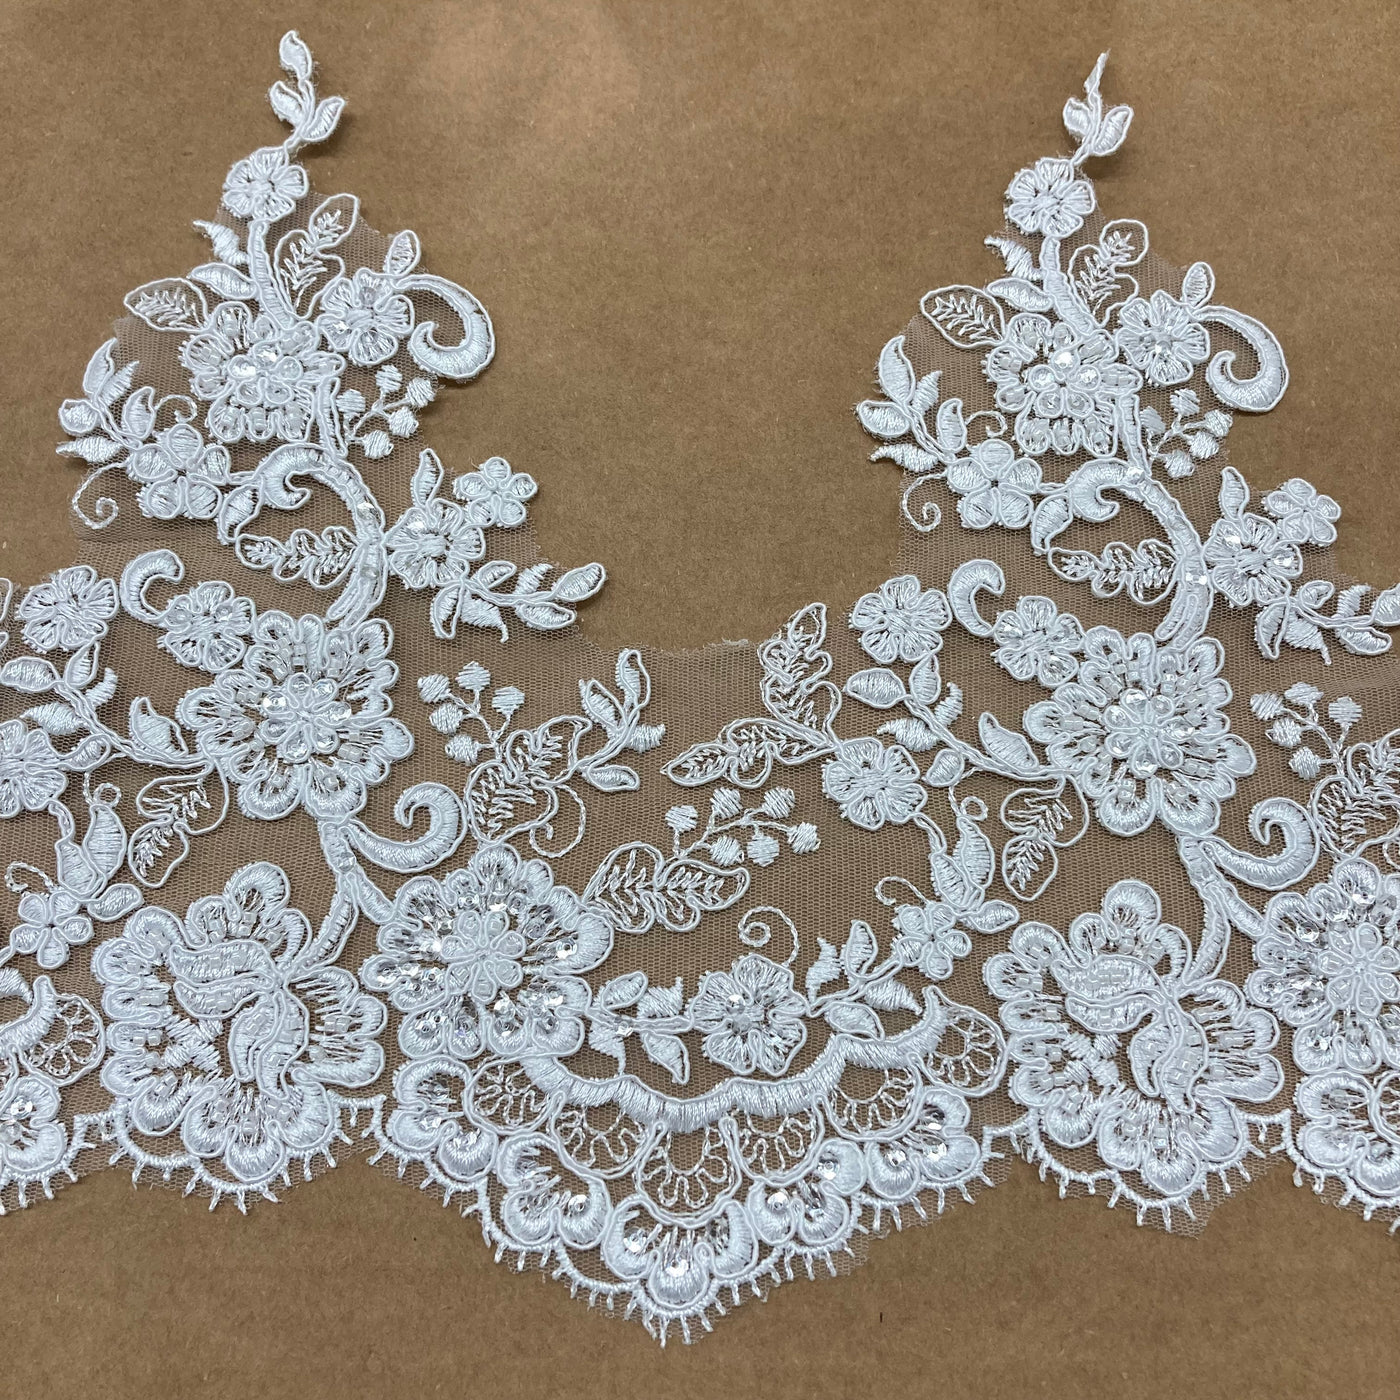 Corded, Beaded Floral White Lace Trimming Embroidered on Net Mesh. Lace Usa